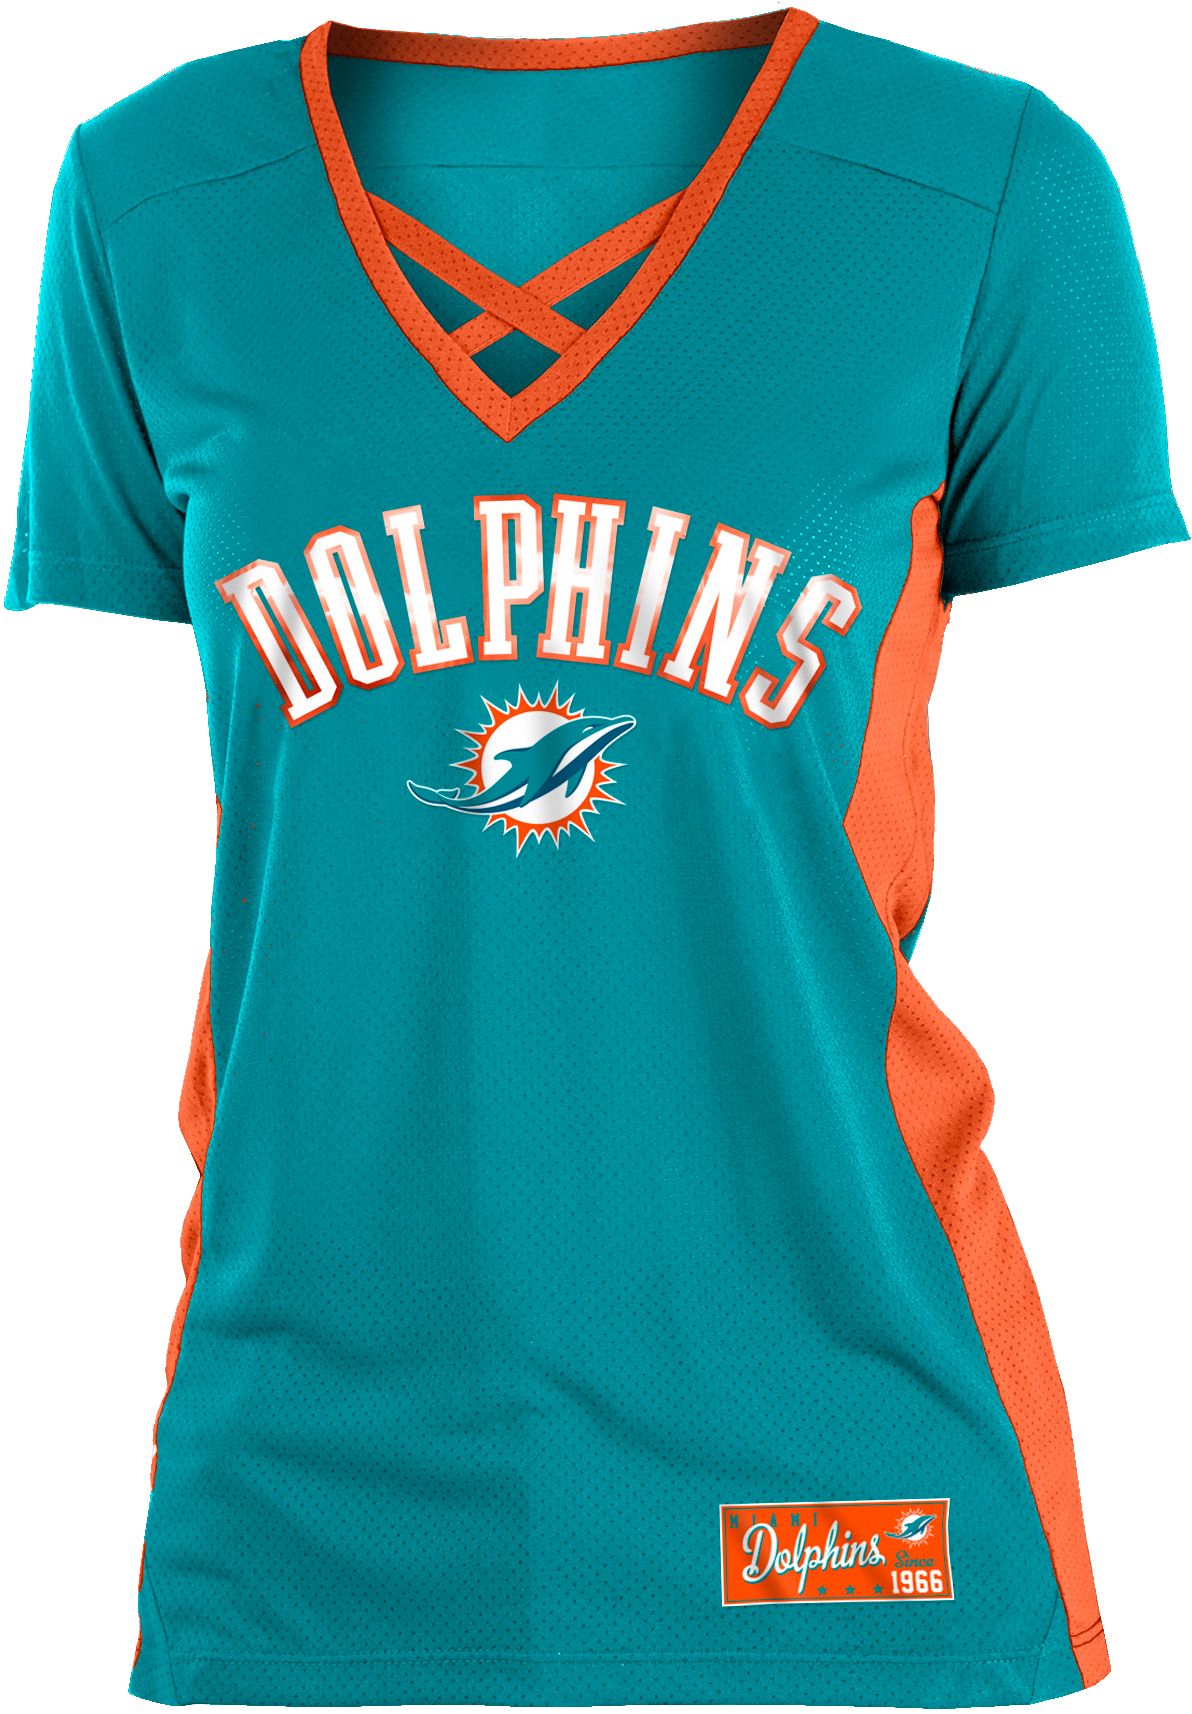 miami dolphins jersey 2019